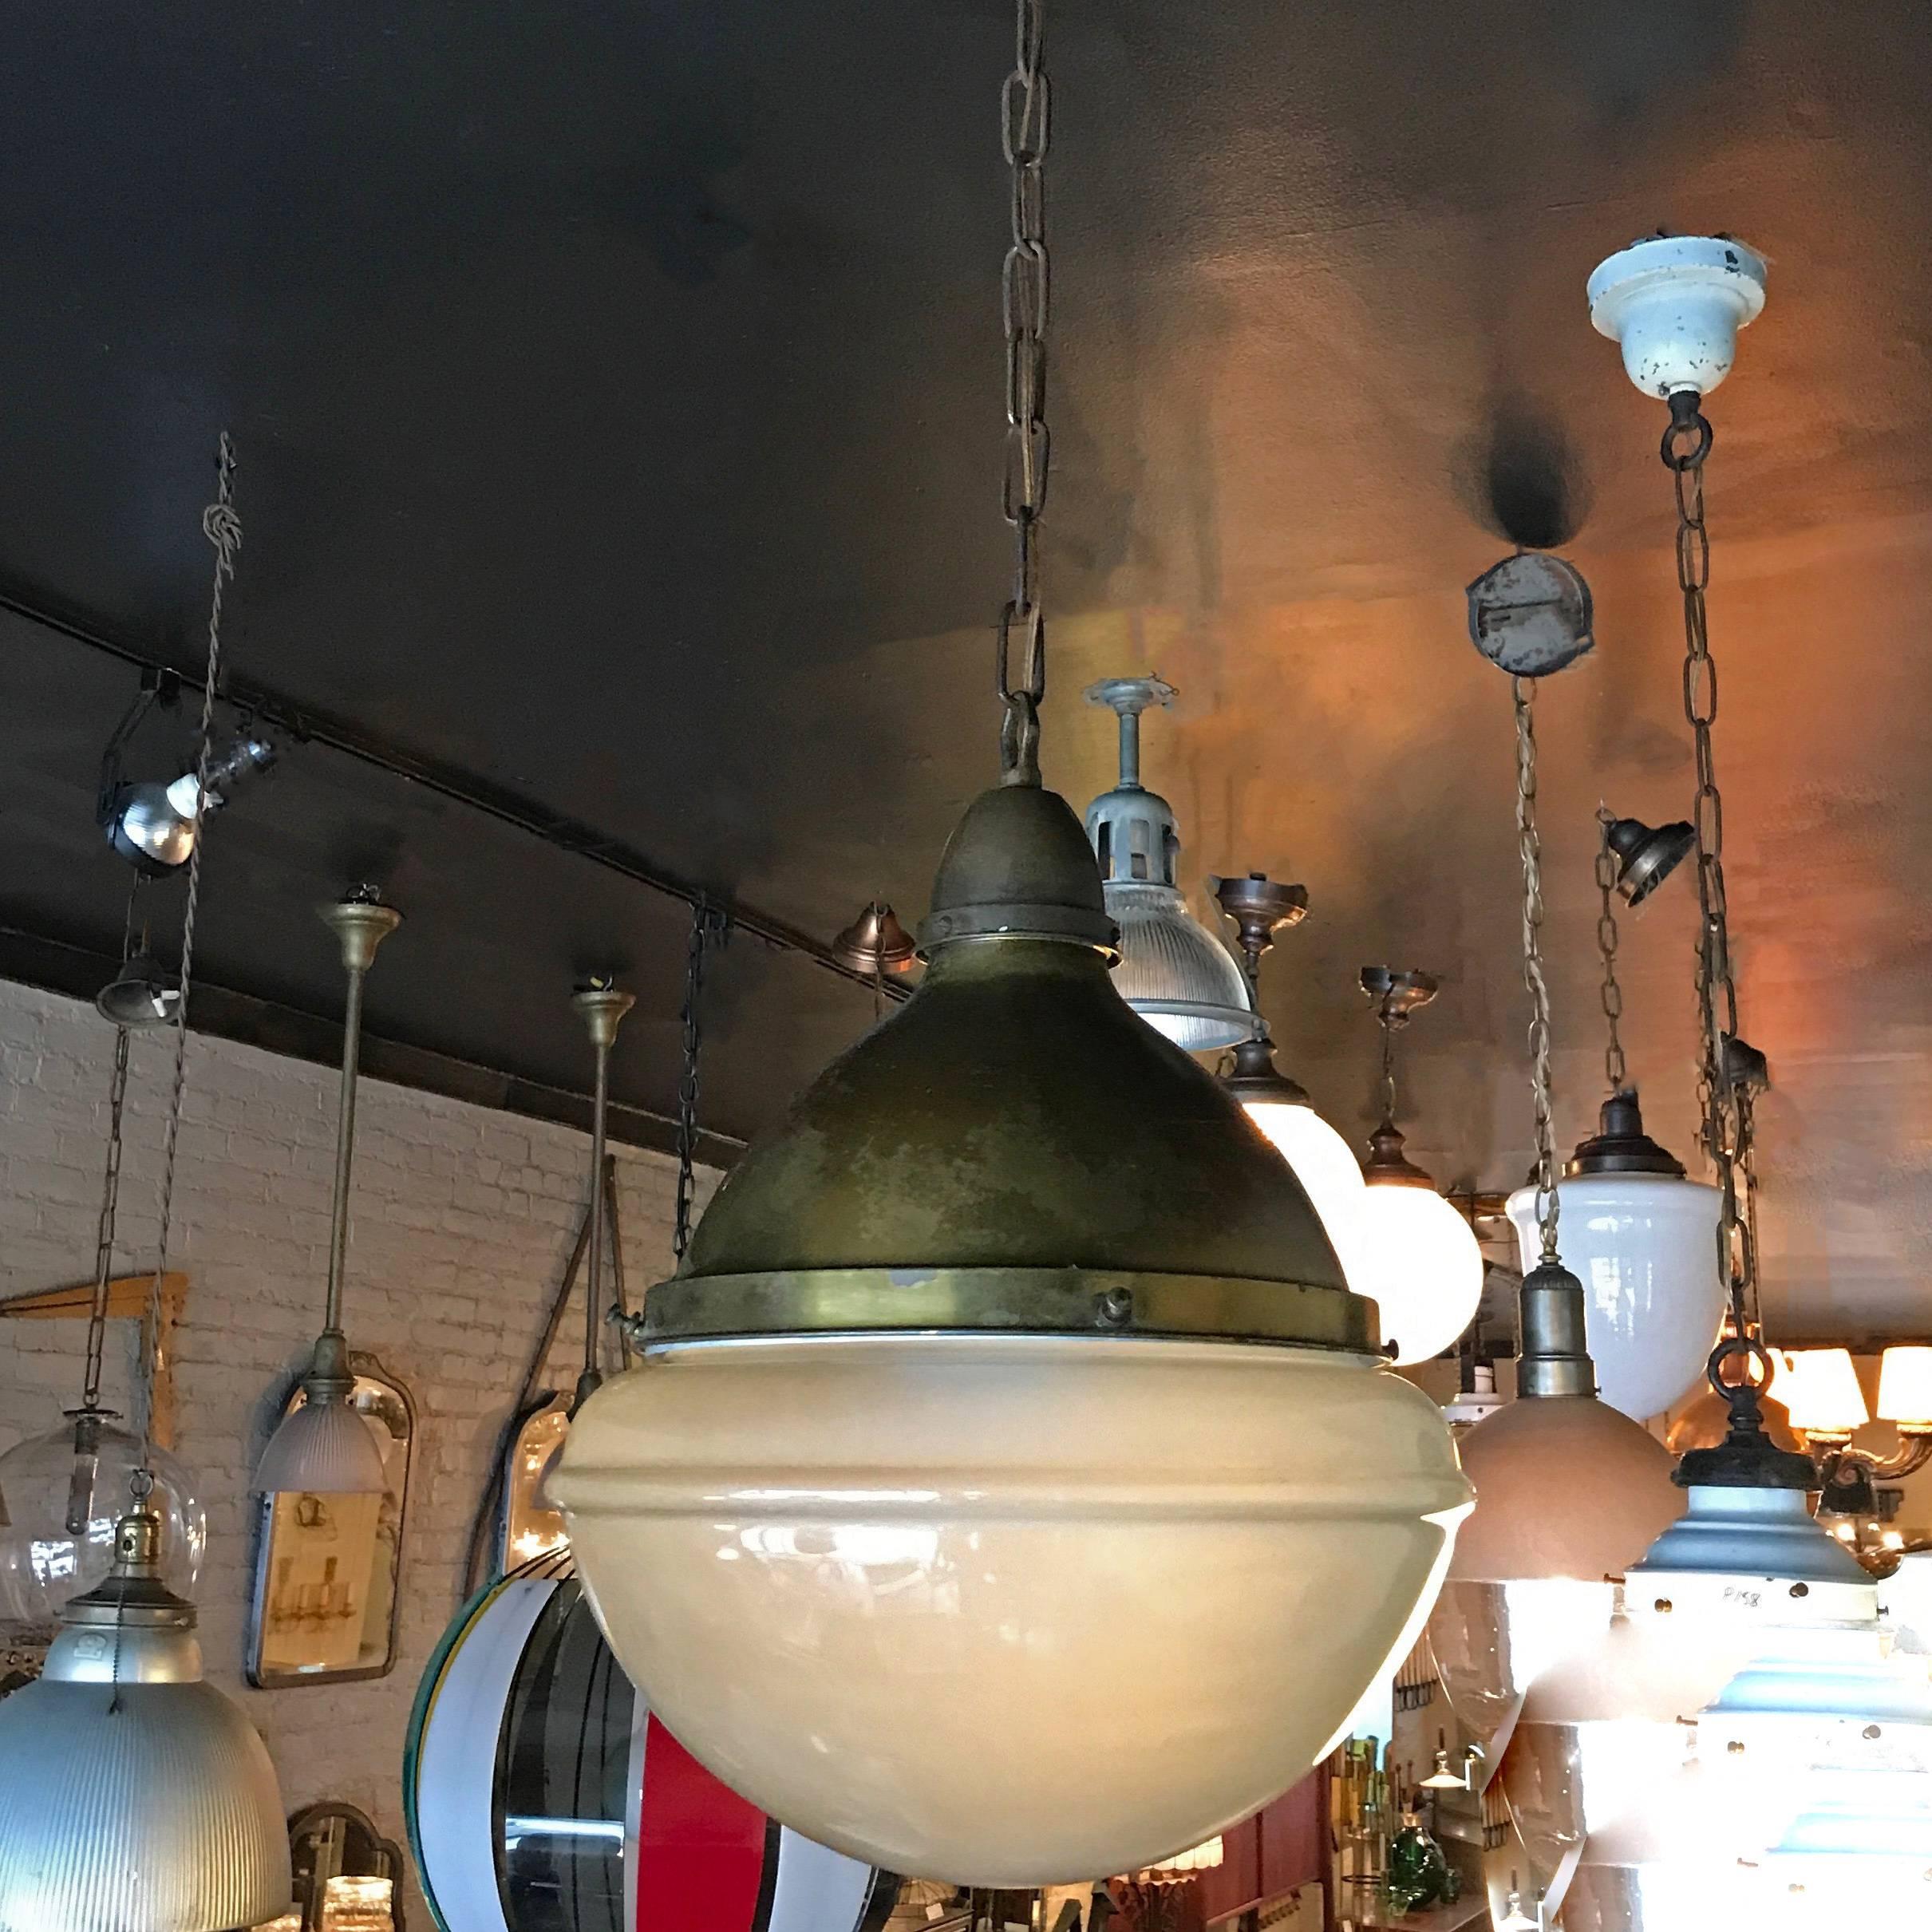 Vintage, early 20th century, oversized and impressive, library or pharmacy pendant light features an acid washed glass shade with original patinated, spun steel fitter, canopy and chain is newly wired to accept up to 300 watts. Overall height: 41 in.